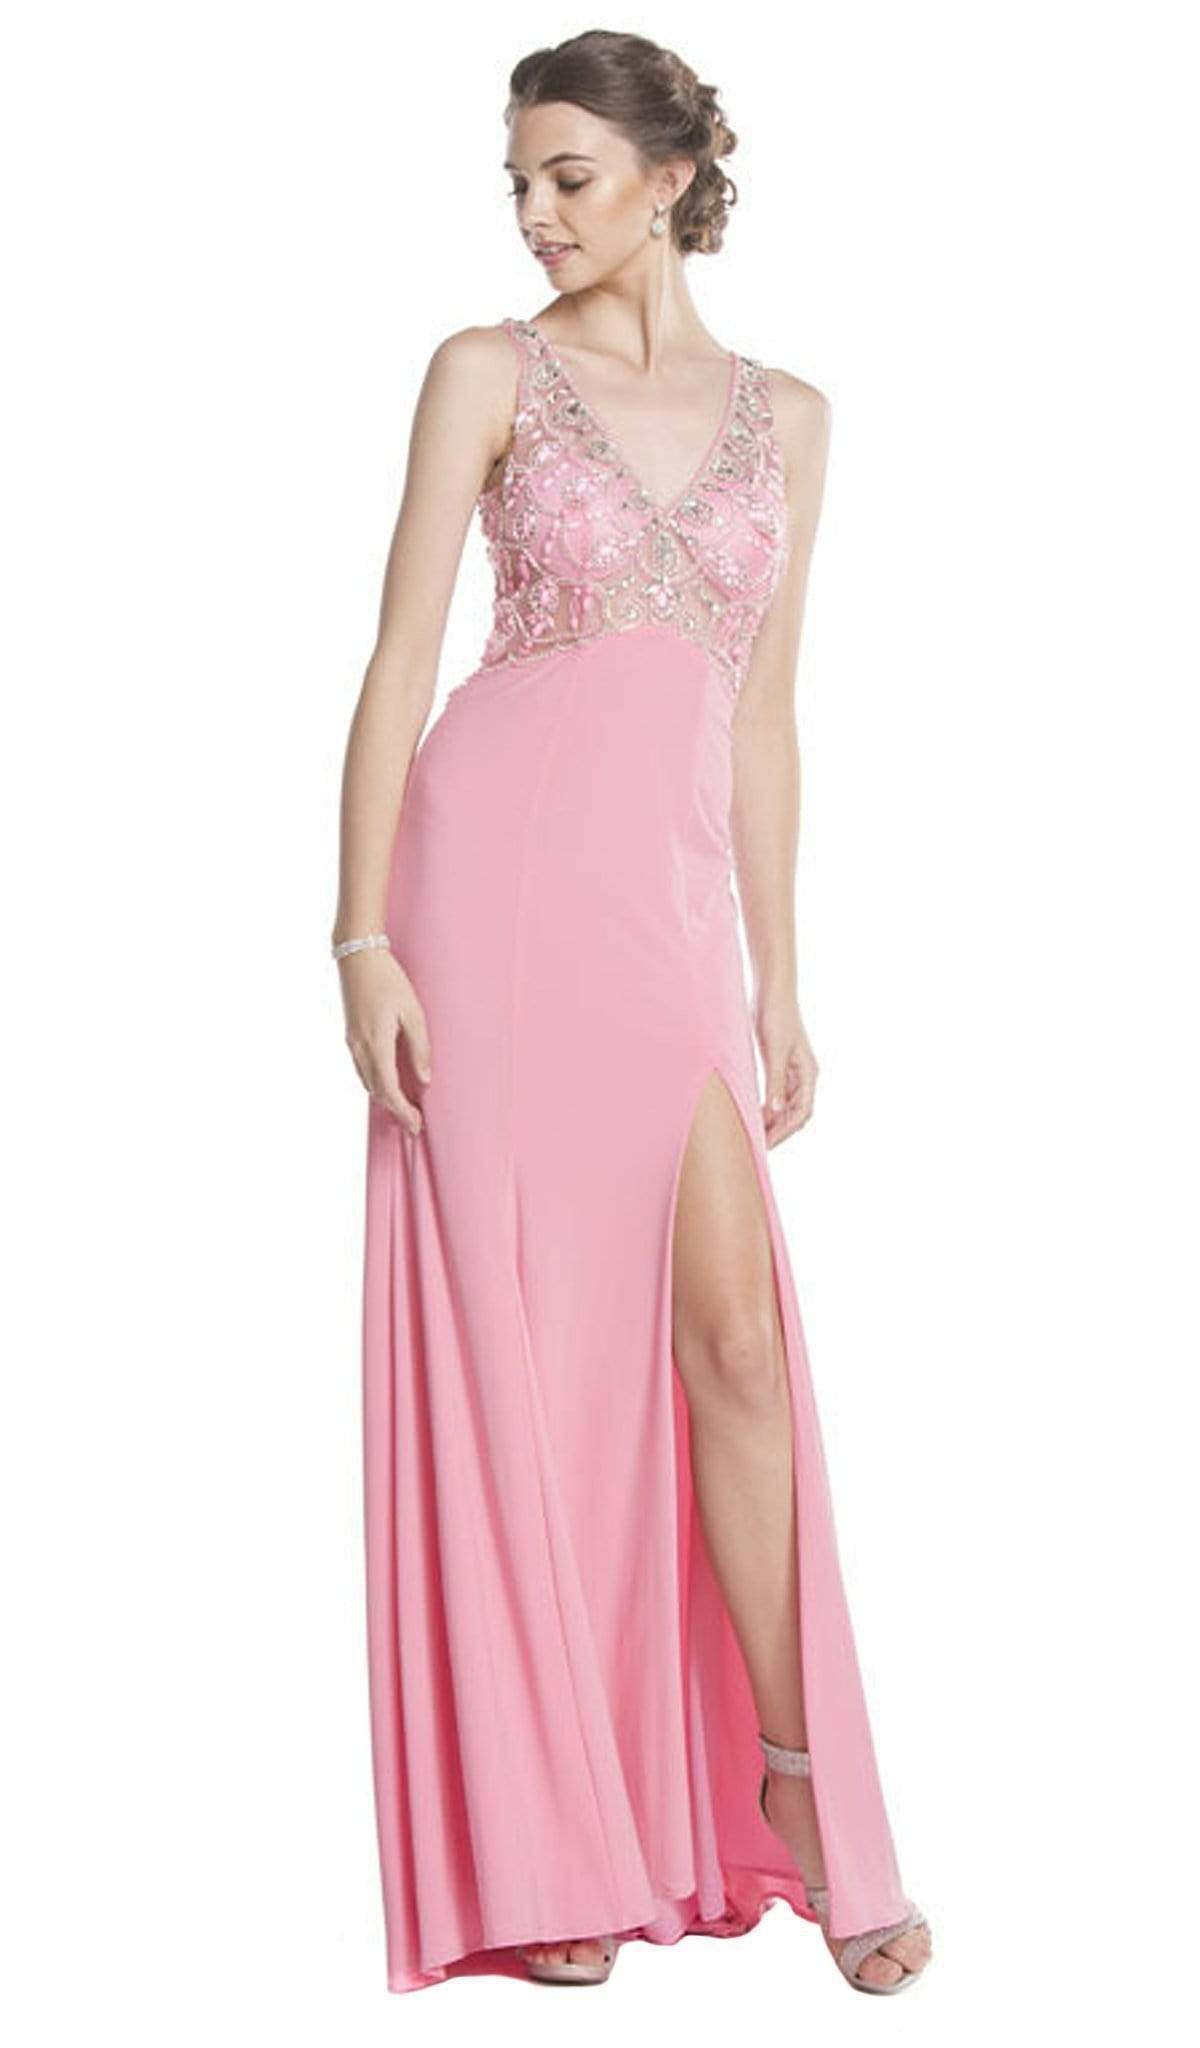 Aspeed Design - Beaded V-Neck Evening Gown with Slit
